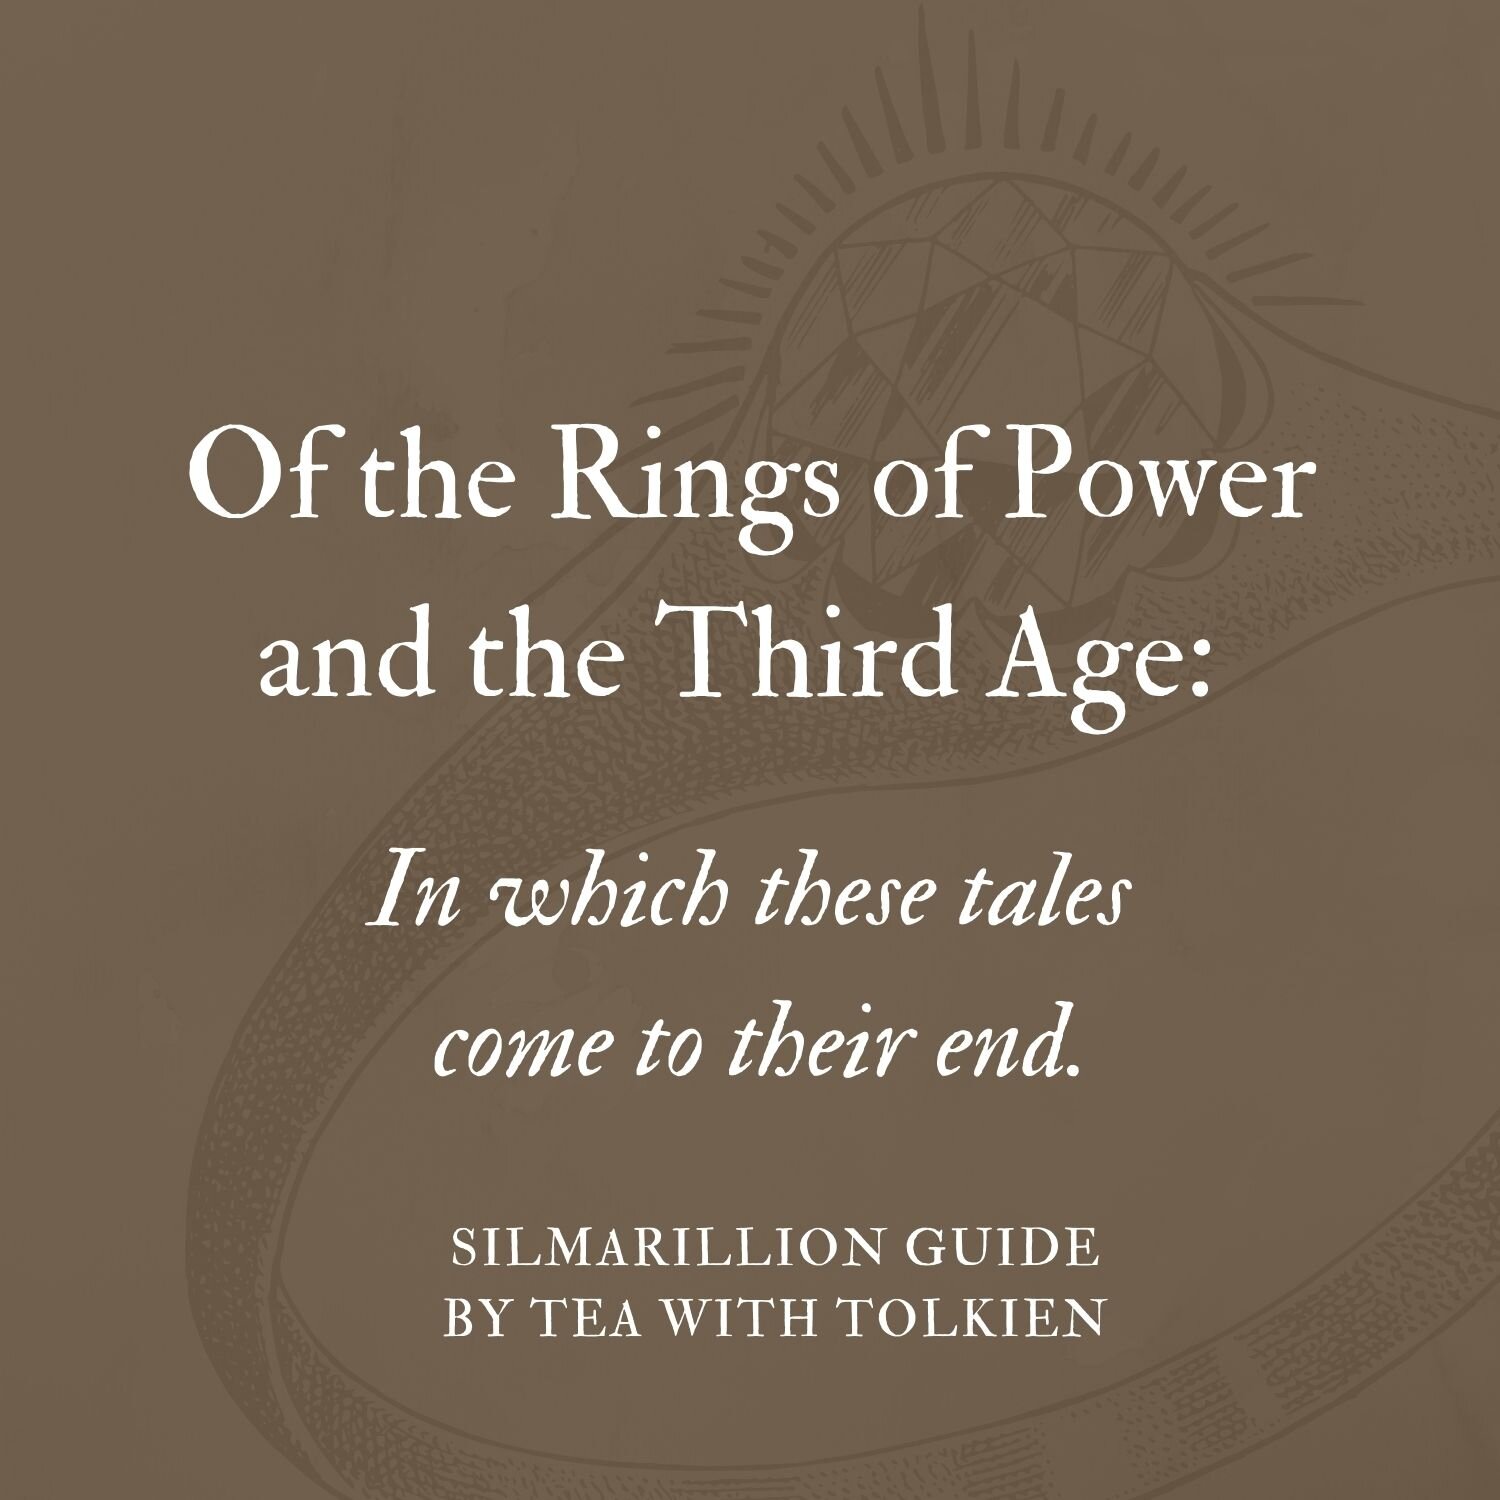 krant cassette Groenteboer 3 Poems from The Lord of the Rings to Memorize — Tea with Tolkien